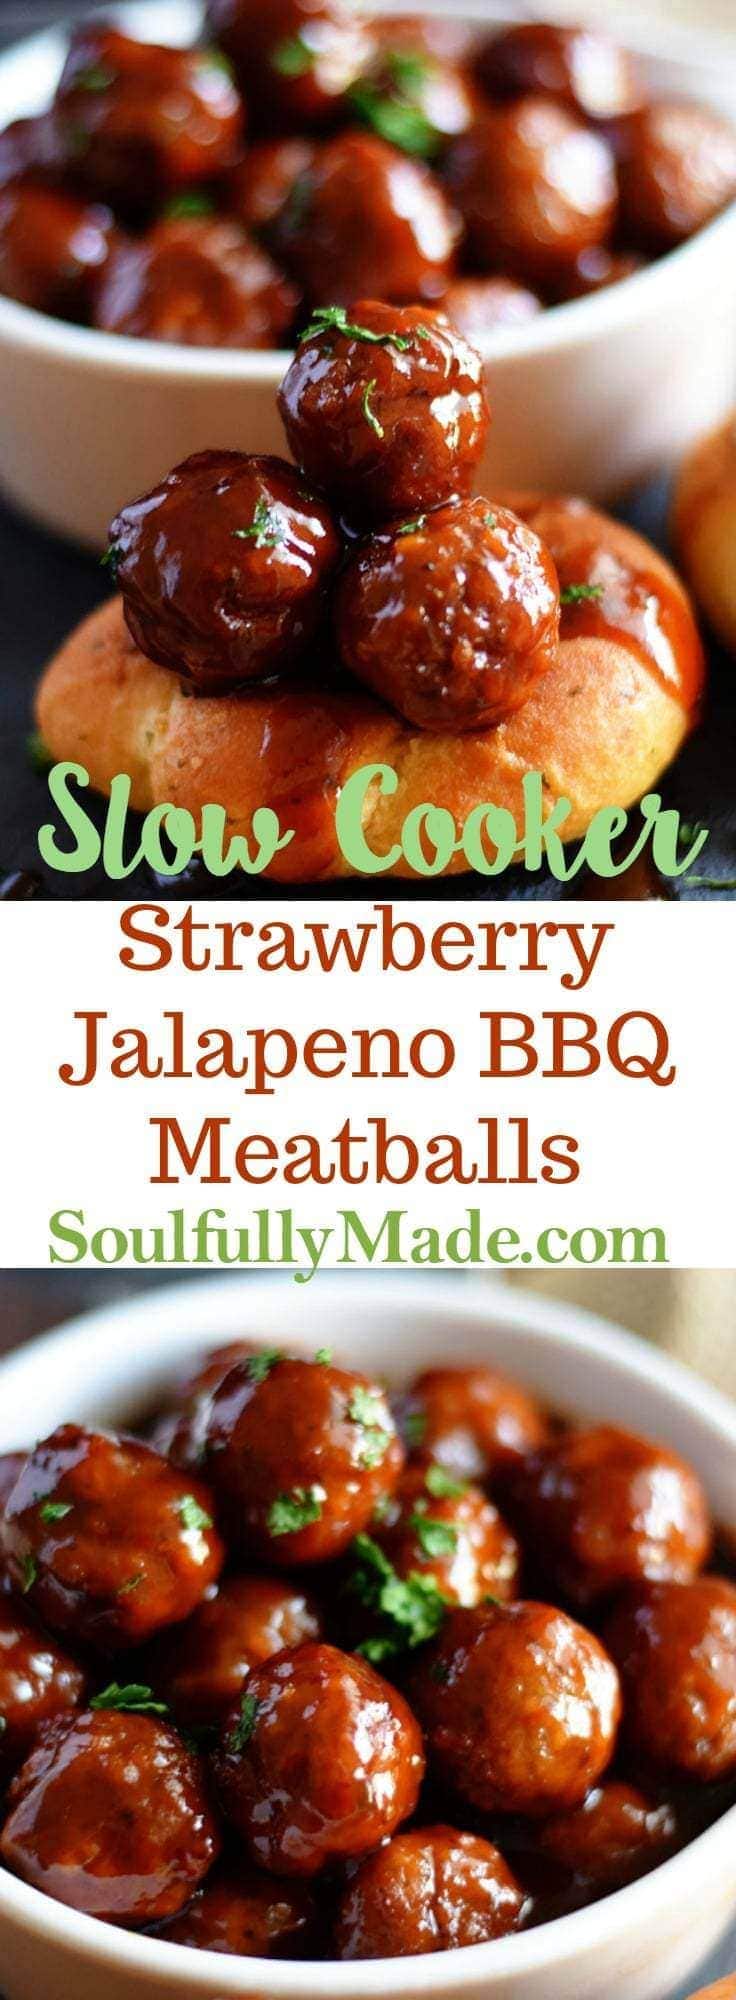 Slow Cooker Strawberry Jalapeno BBQ Meatballs